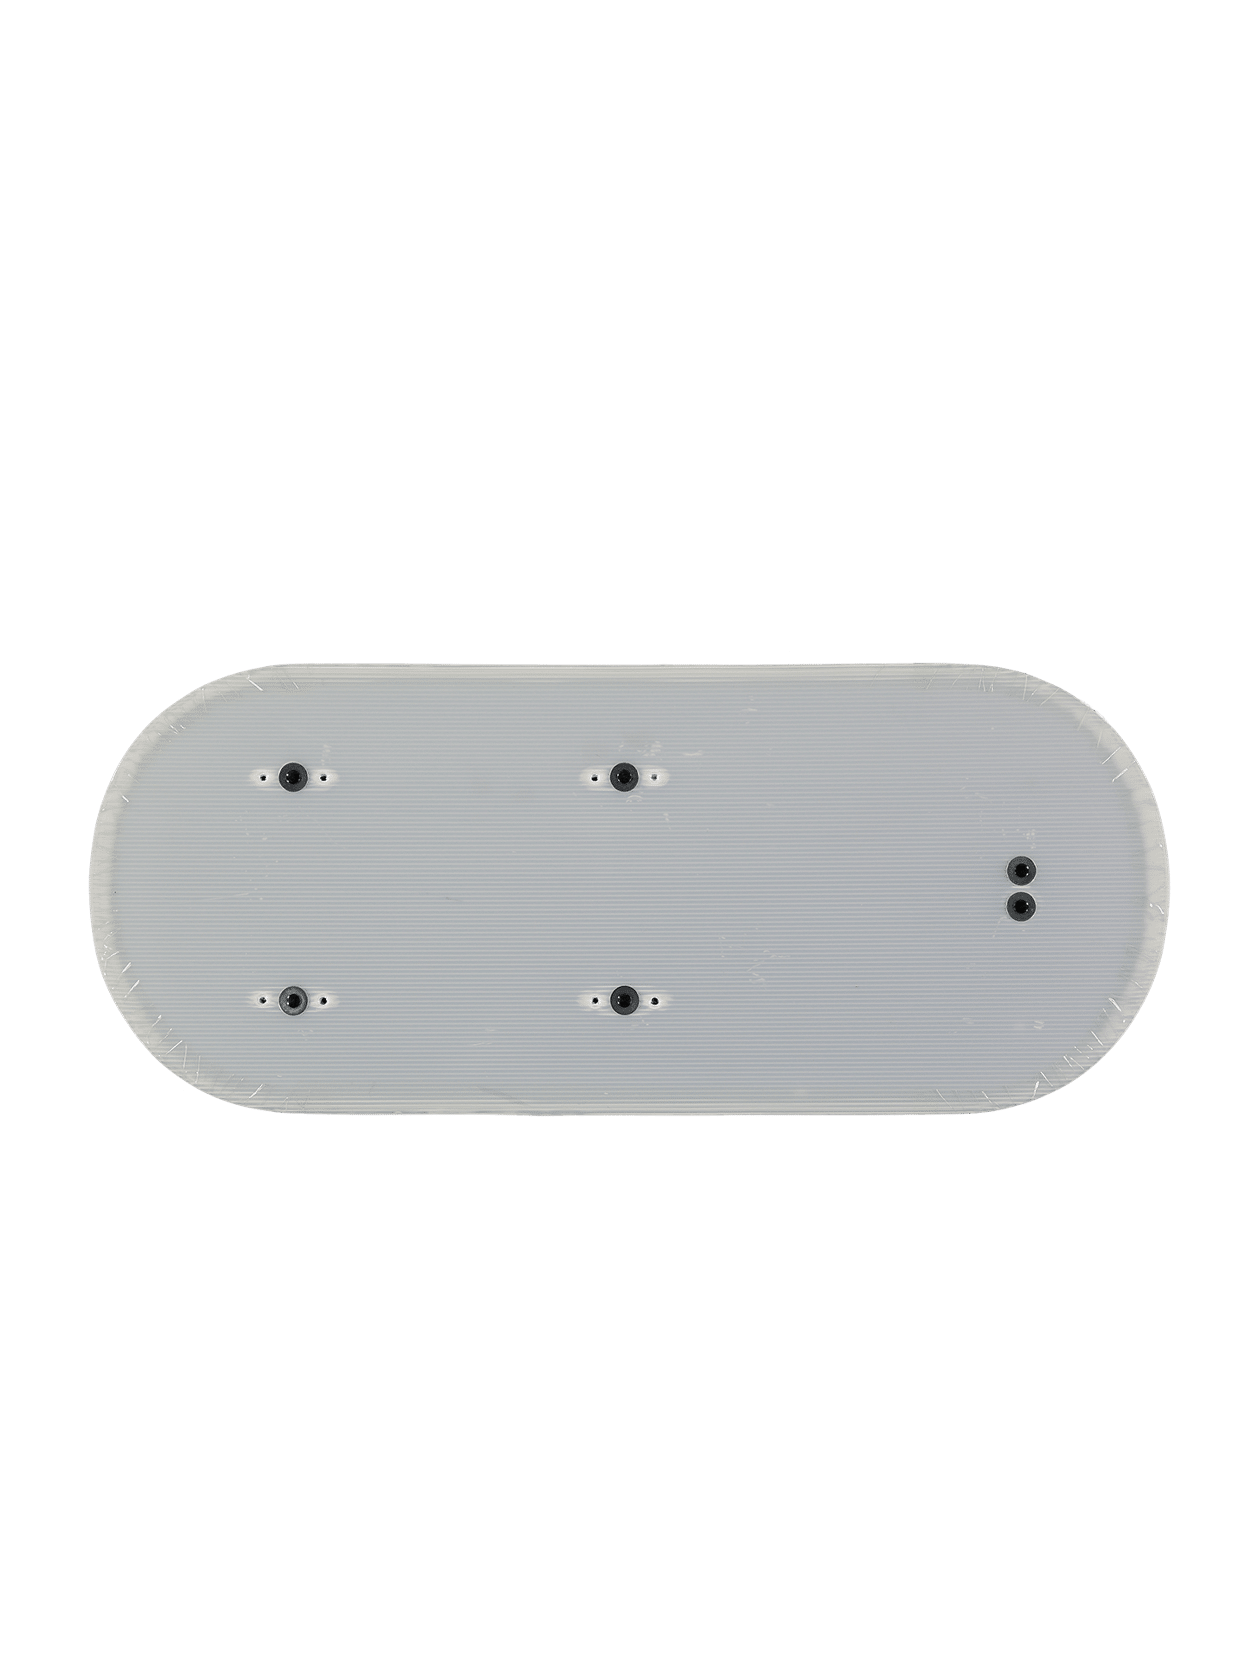 Strawberry 2 Carrycot Baseboard